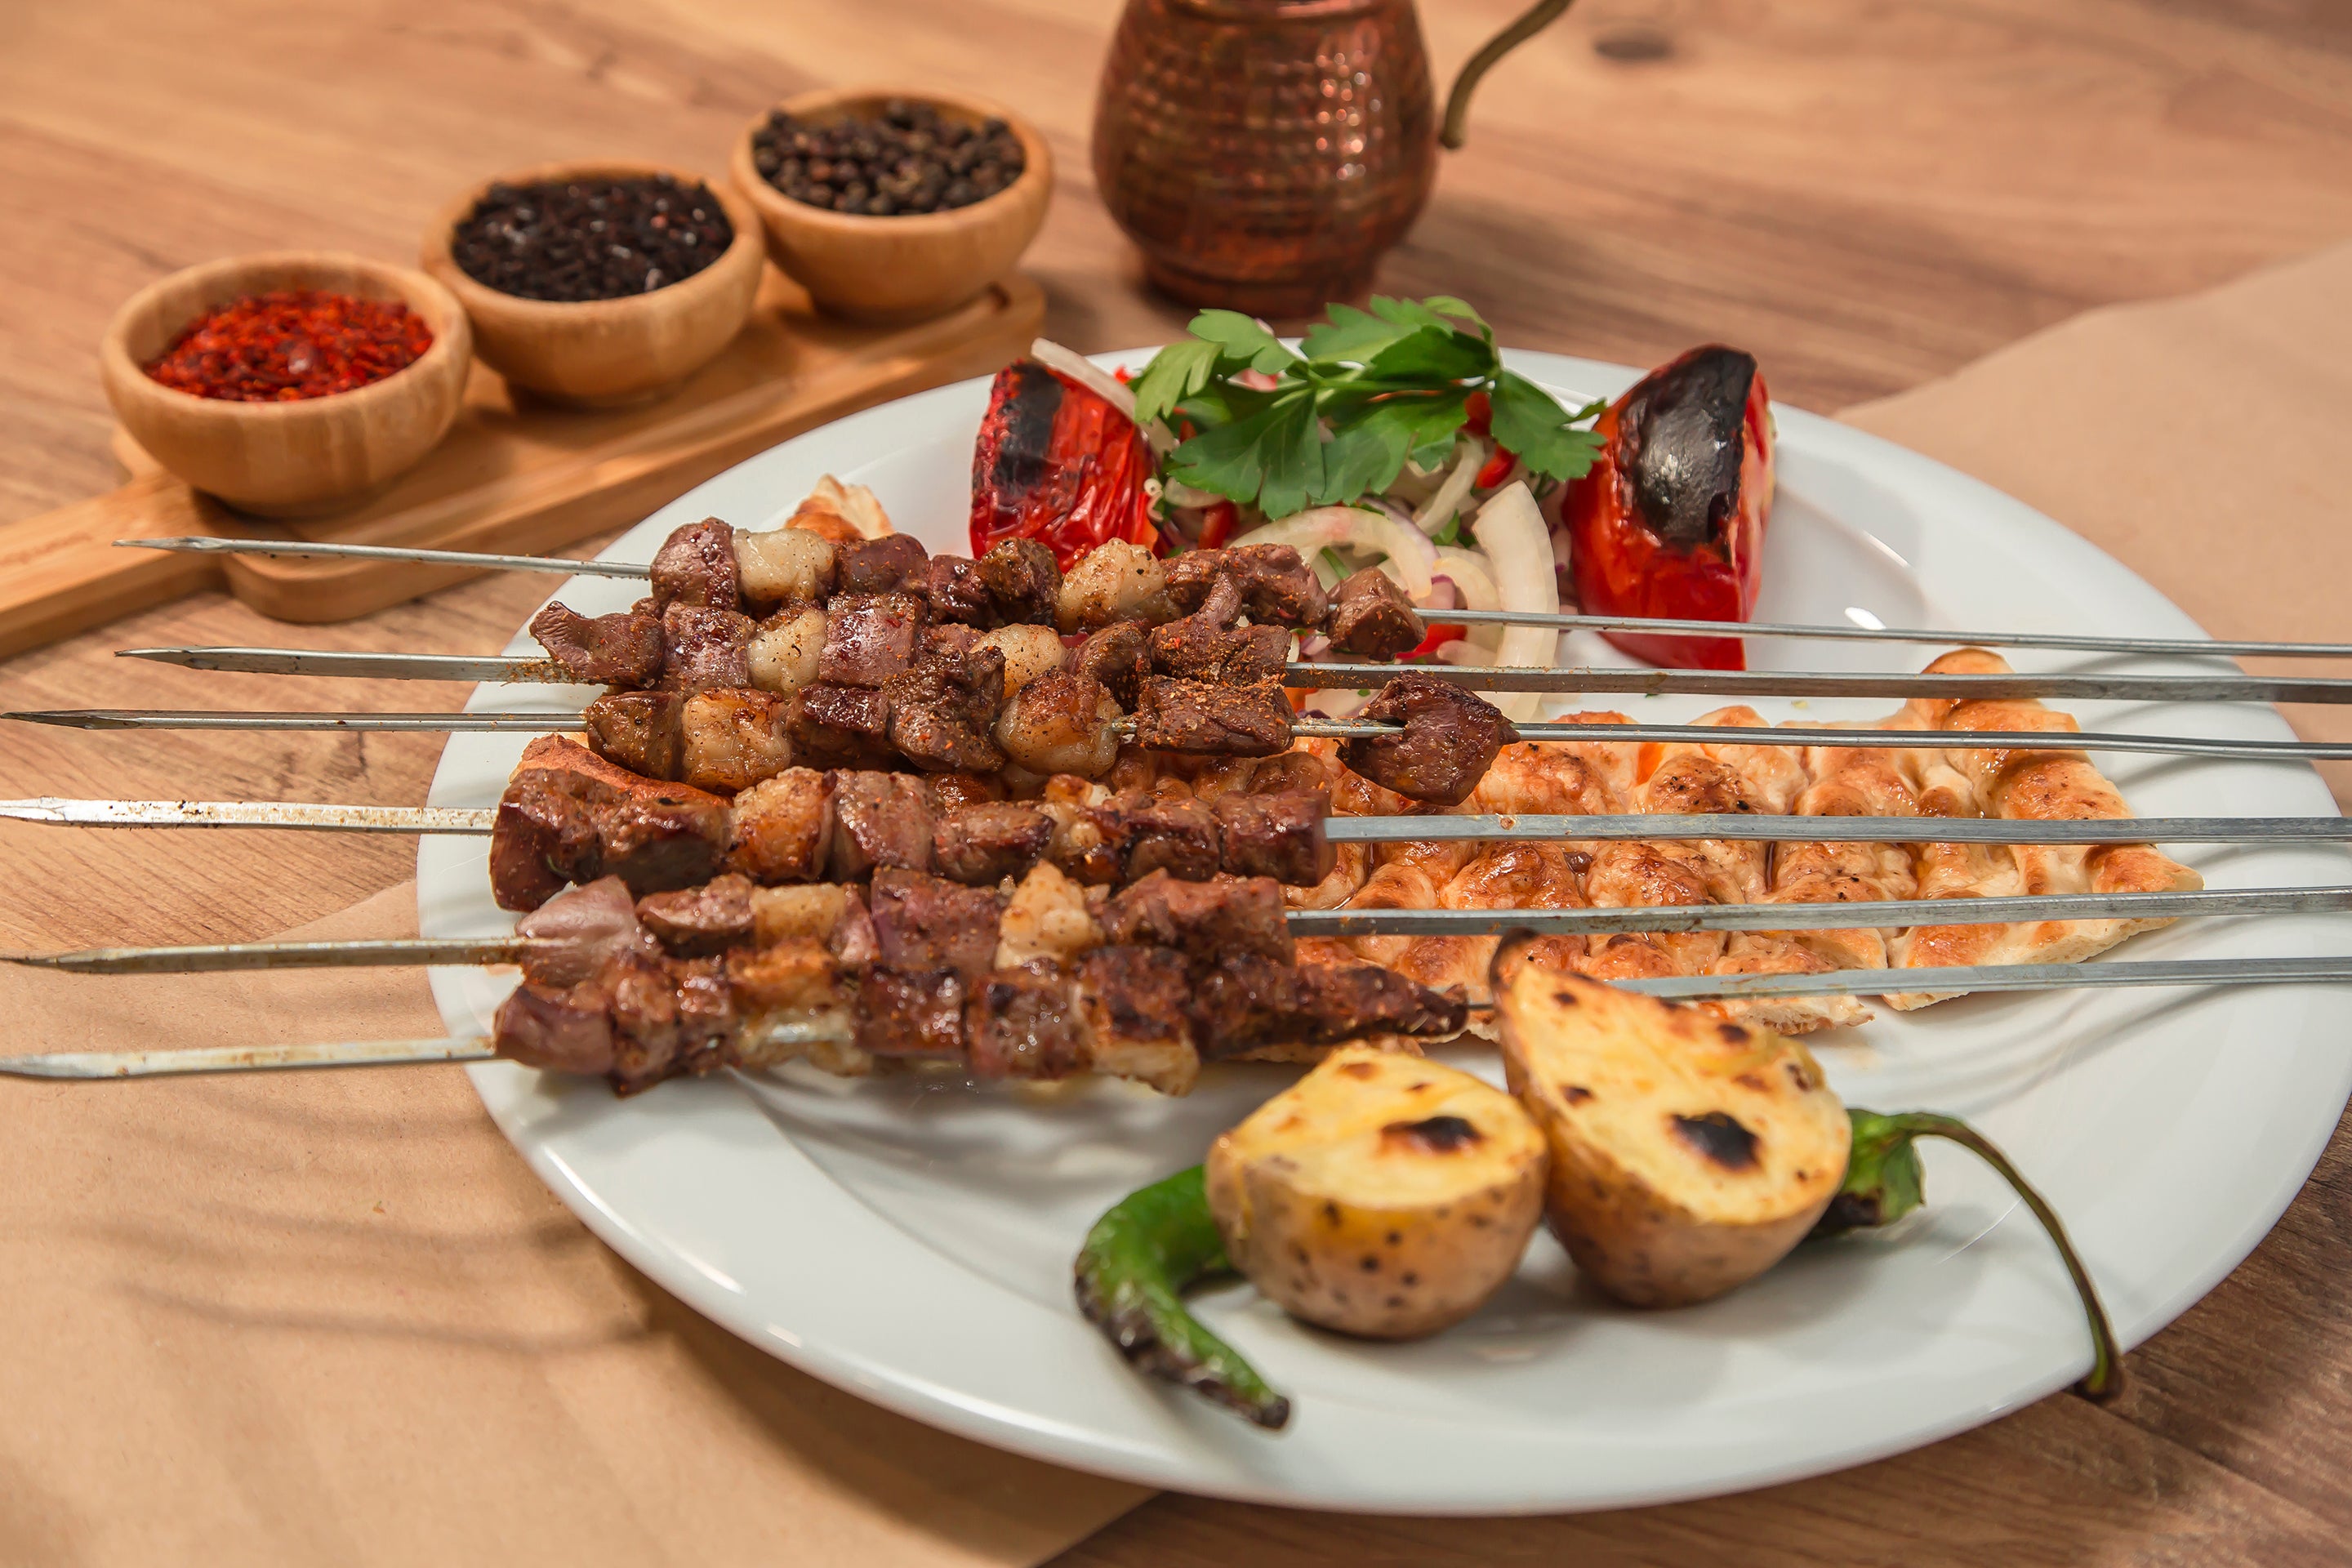 Grilled Chicken Kebabs are skewered chicken pieces marinated in yogurt and spices, including sumac, and then grilled until tender and charred.